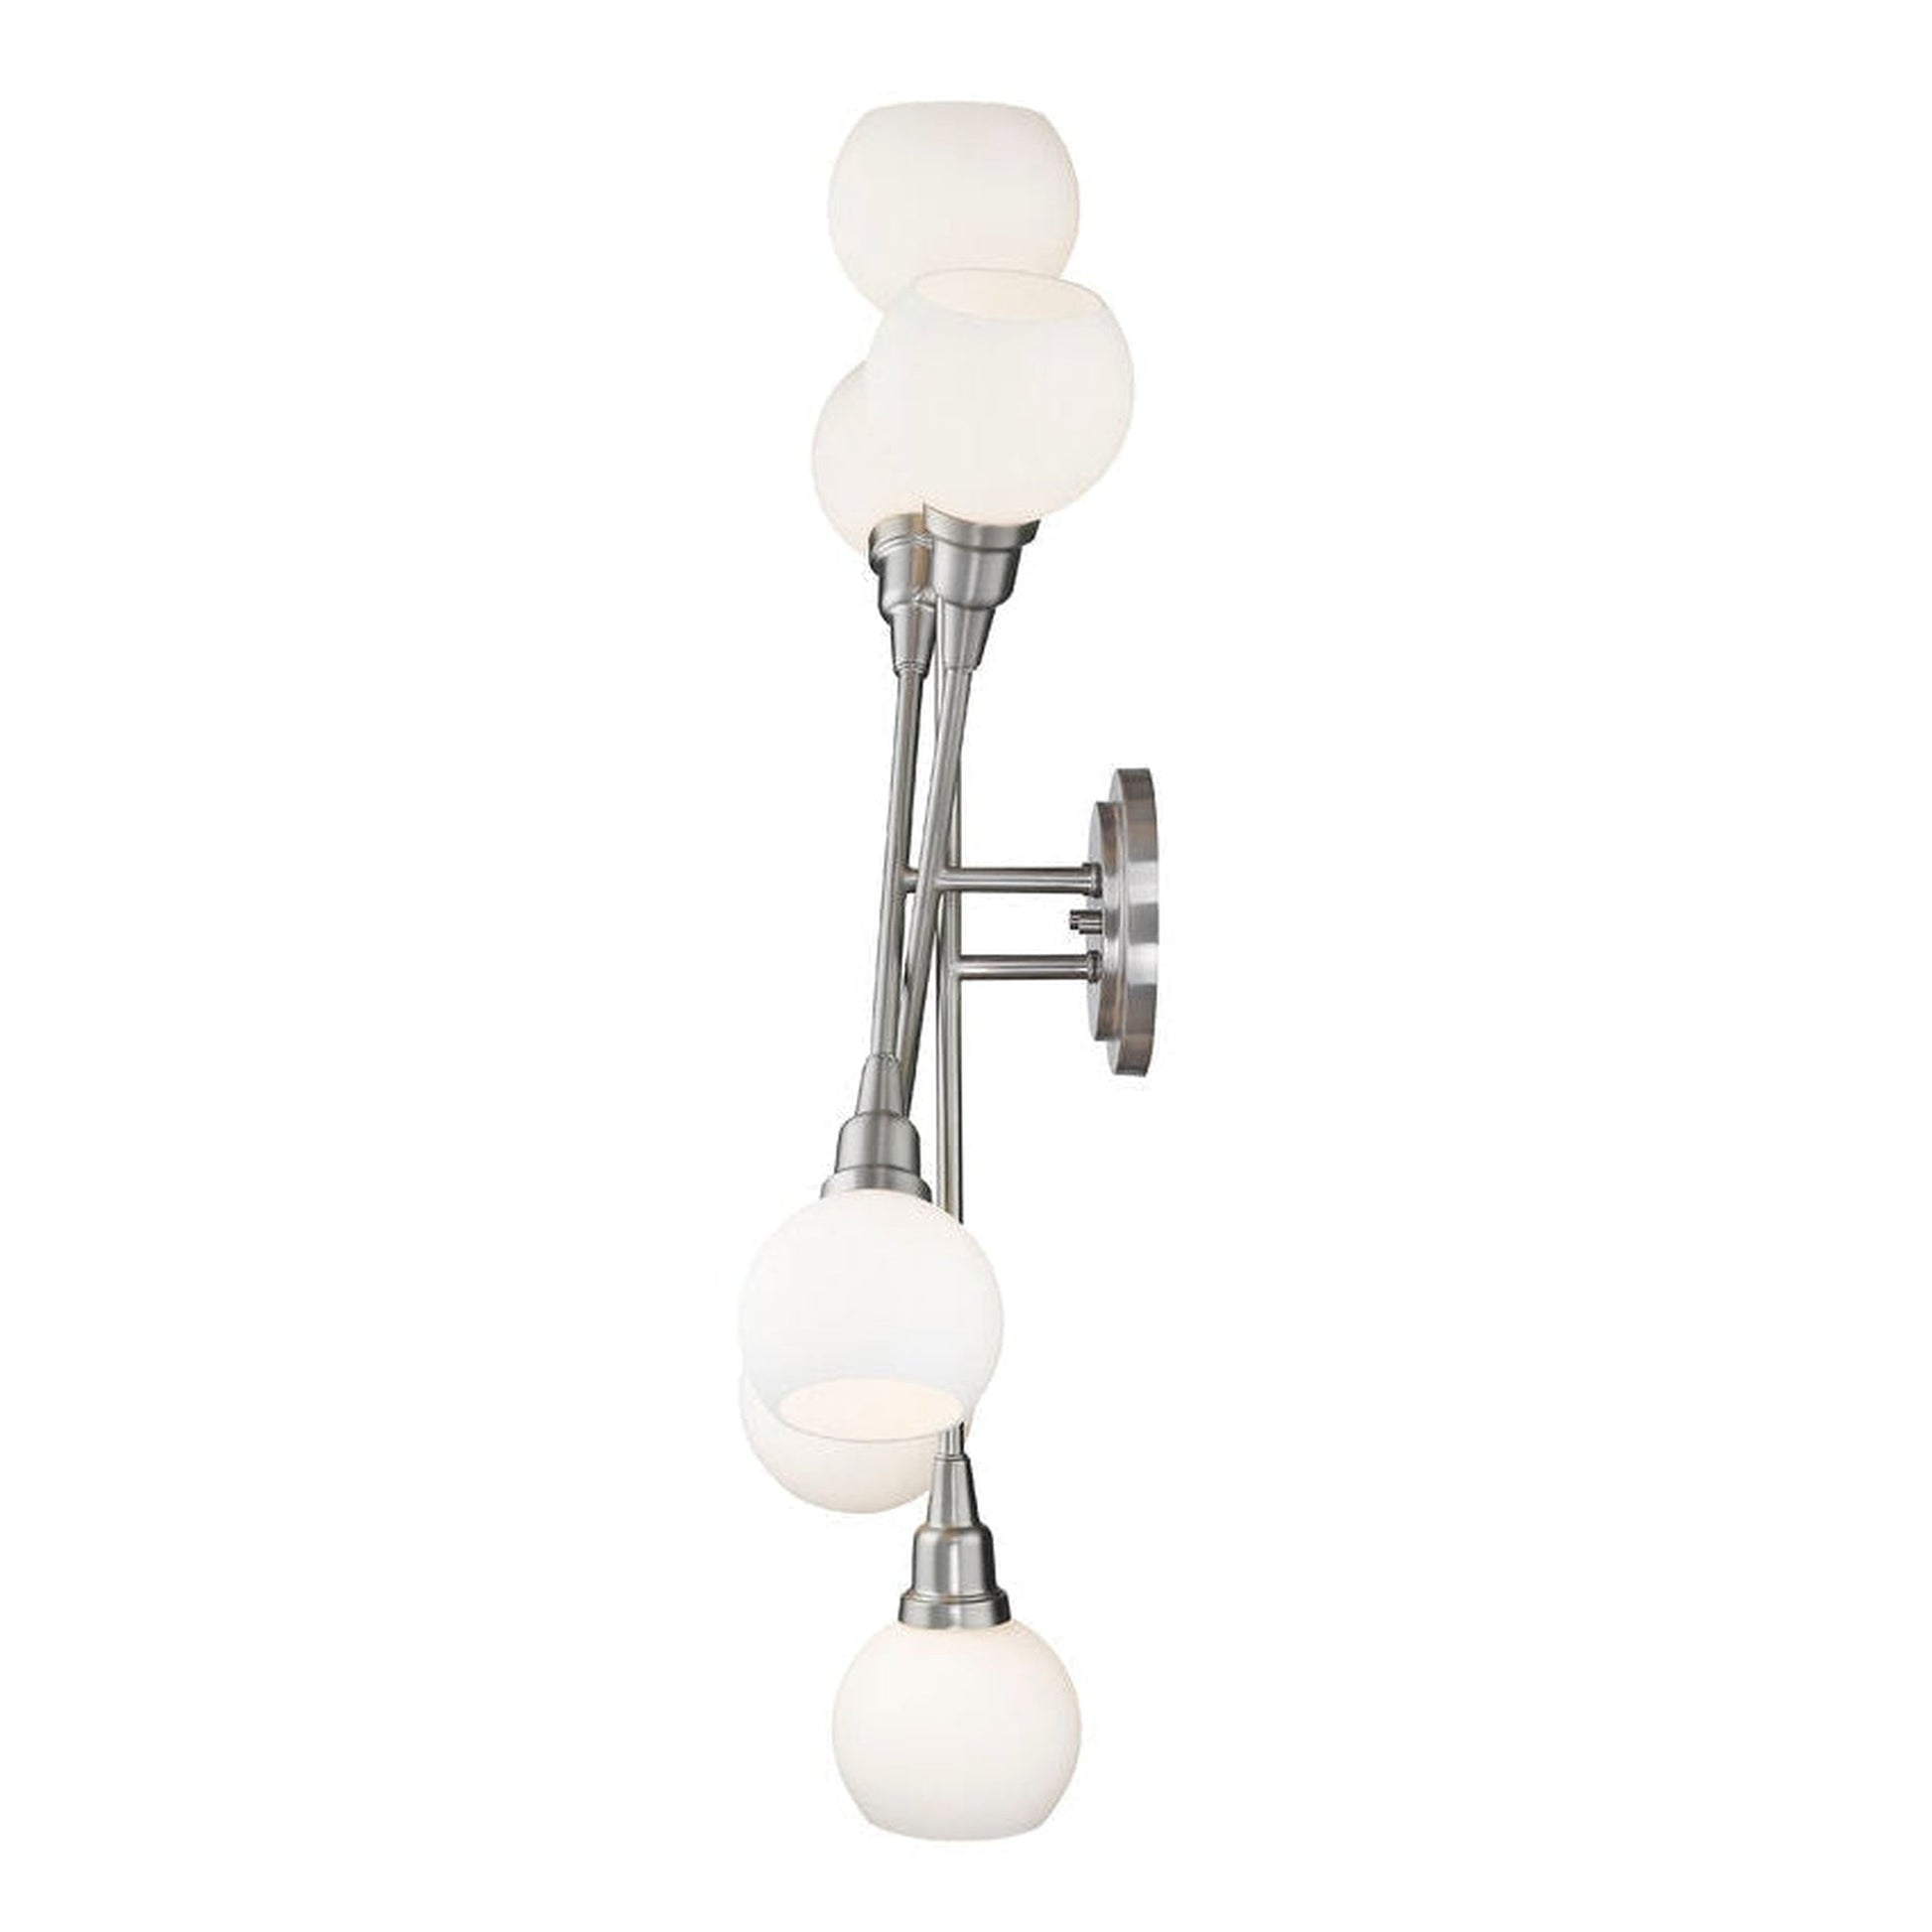 Z-Lite Tian 15" 6-Light LED Brushed Nickel Wall Sconce With Matte Opal Glass Shade